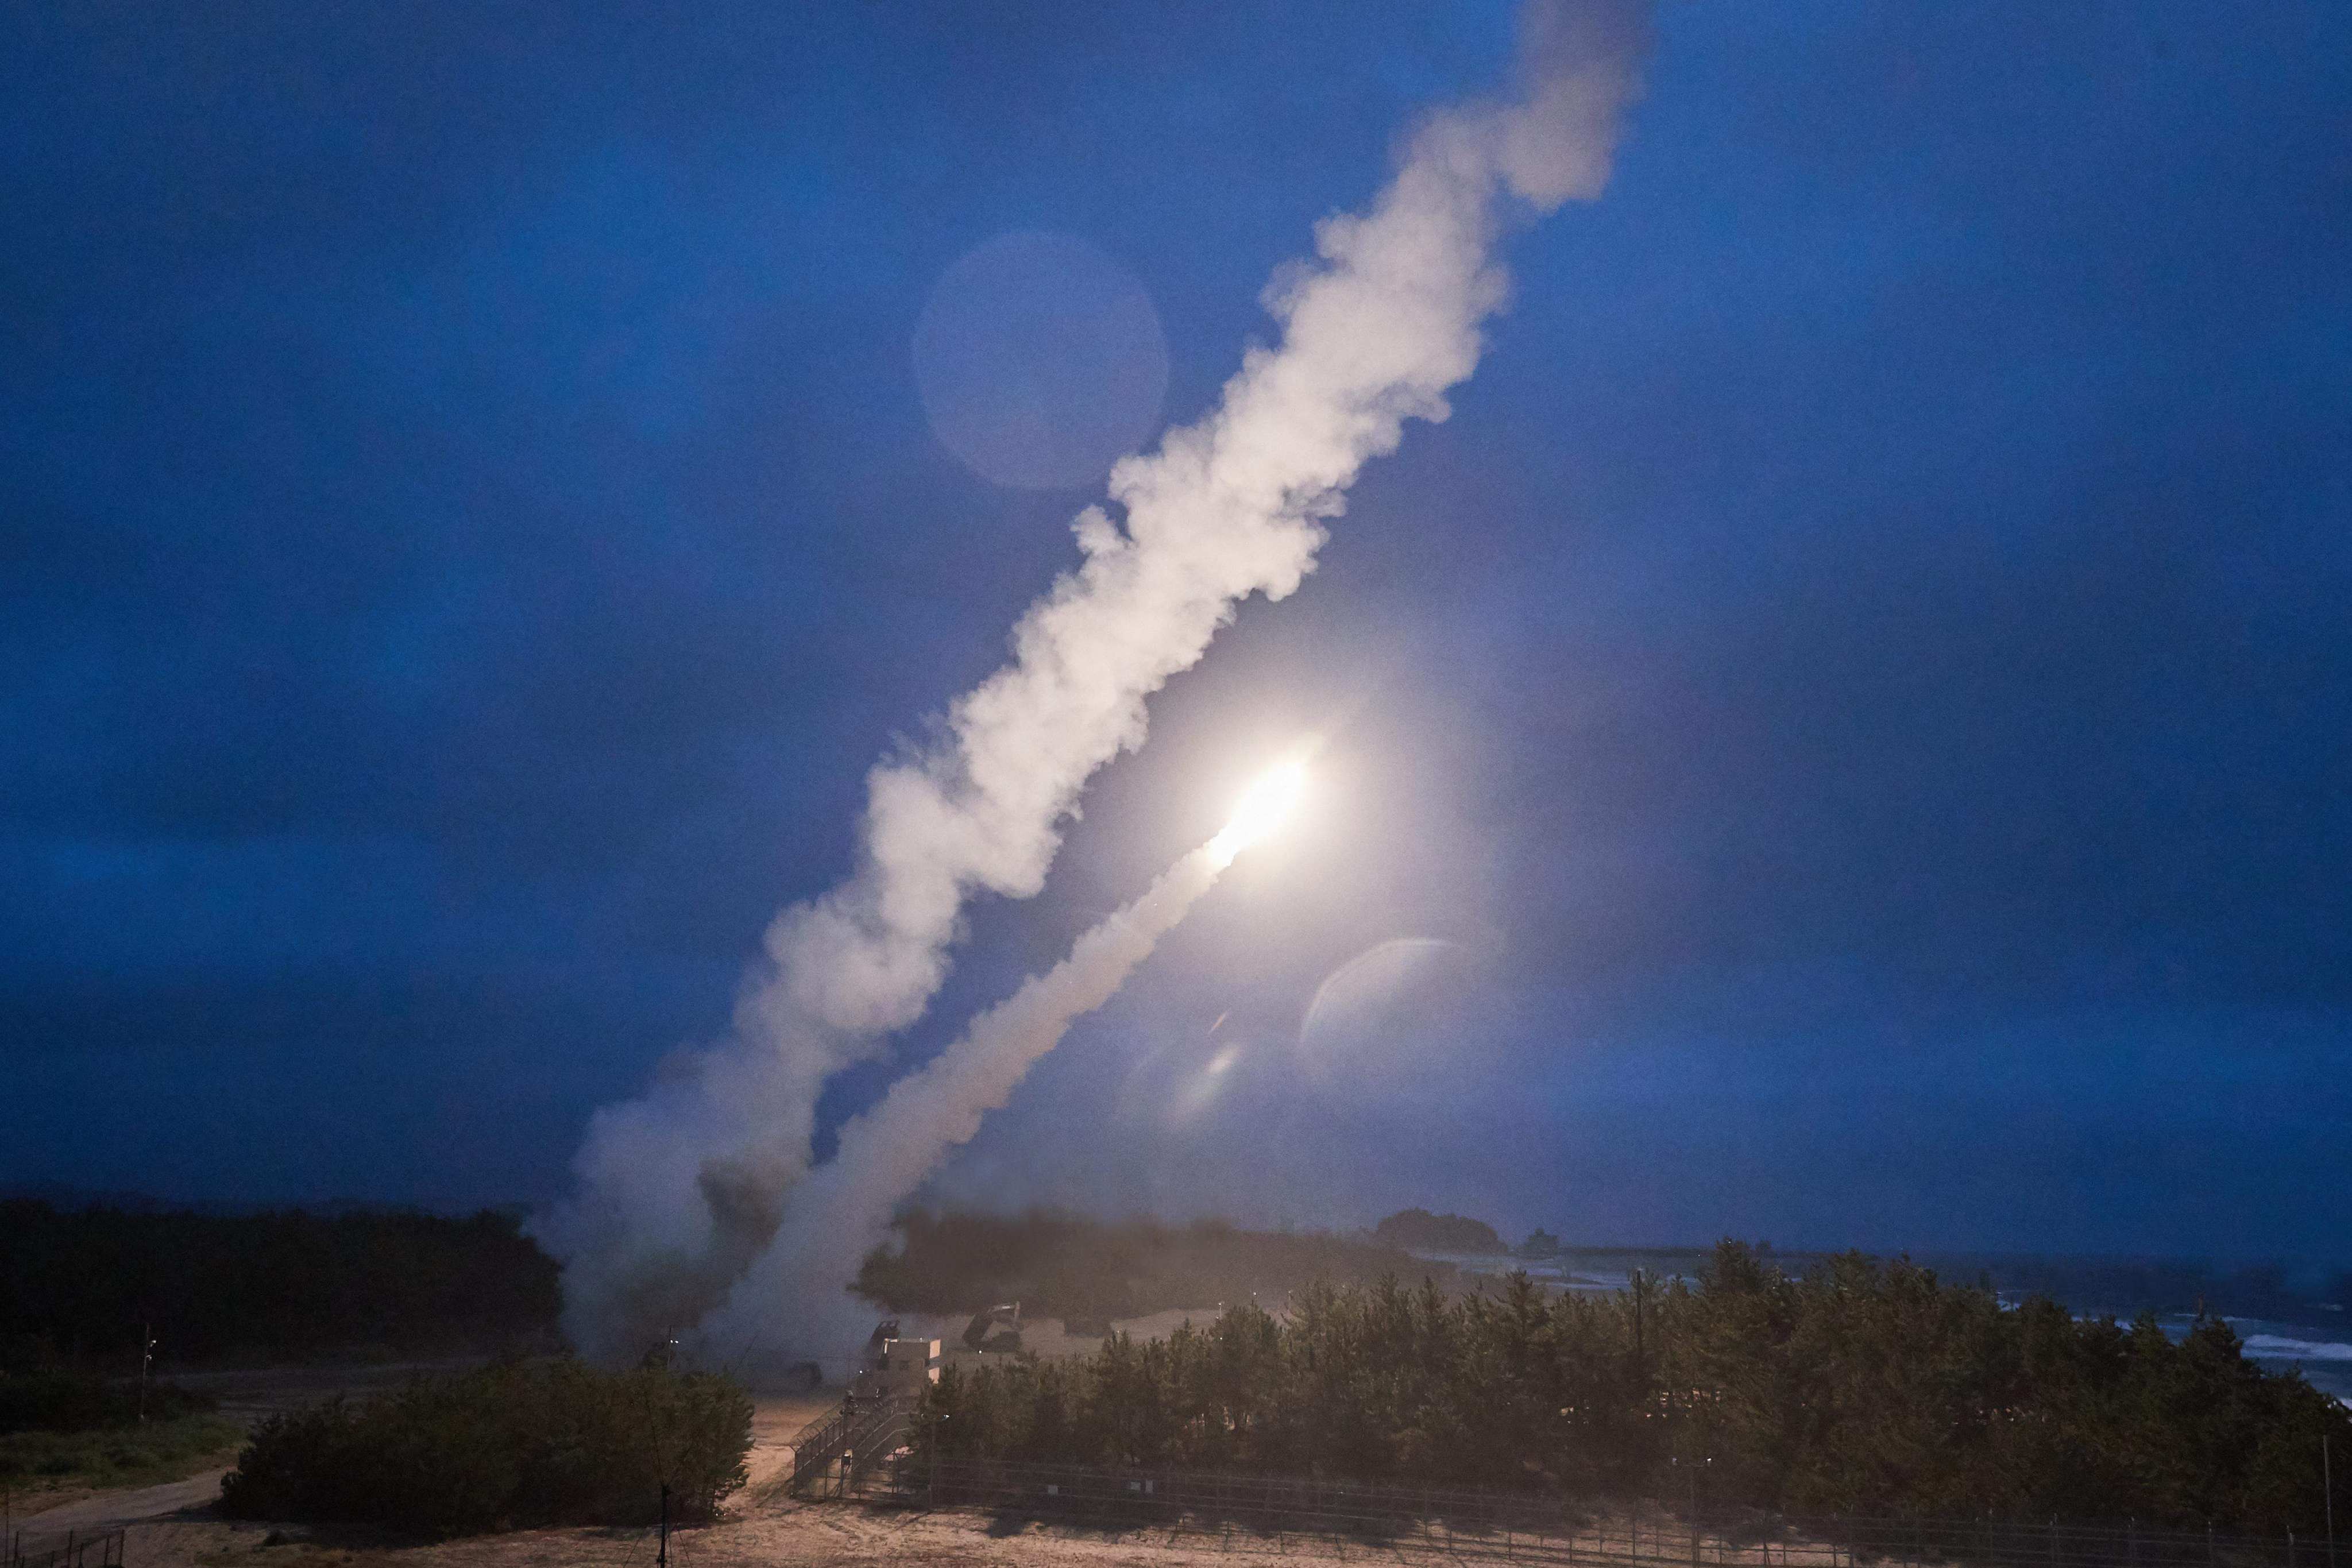 An Army Tactical Missile System (ATACMS) fires from an undisclosed location on South Korea’s east coast during a South Korea-US joint live-fire exercise in June 2022. The same technology has been granted to Ukraine for its use in its war against Russia. Photo: South Korea’s Joint Chiefs of Staff via AFP